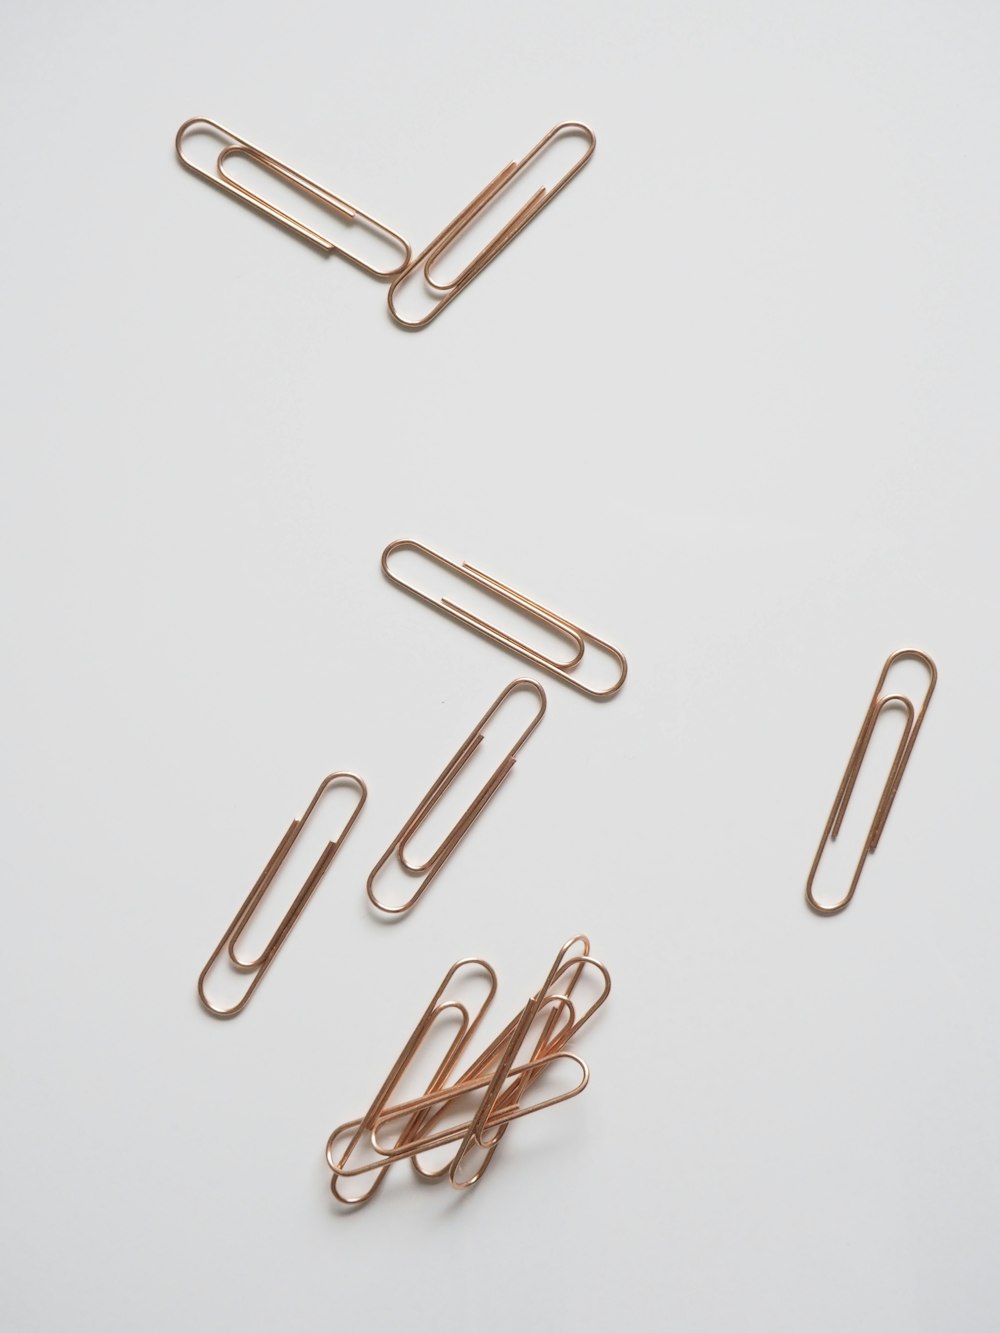 brown paper clips on white surface